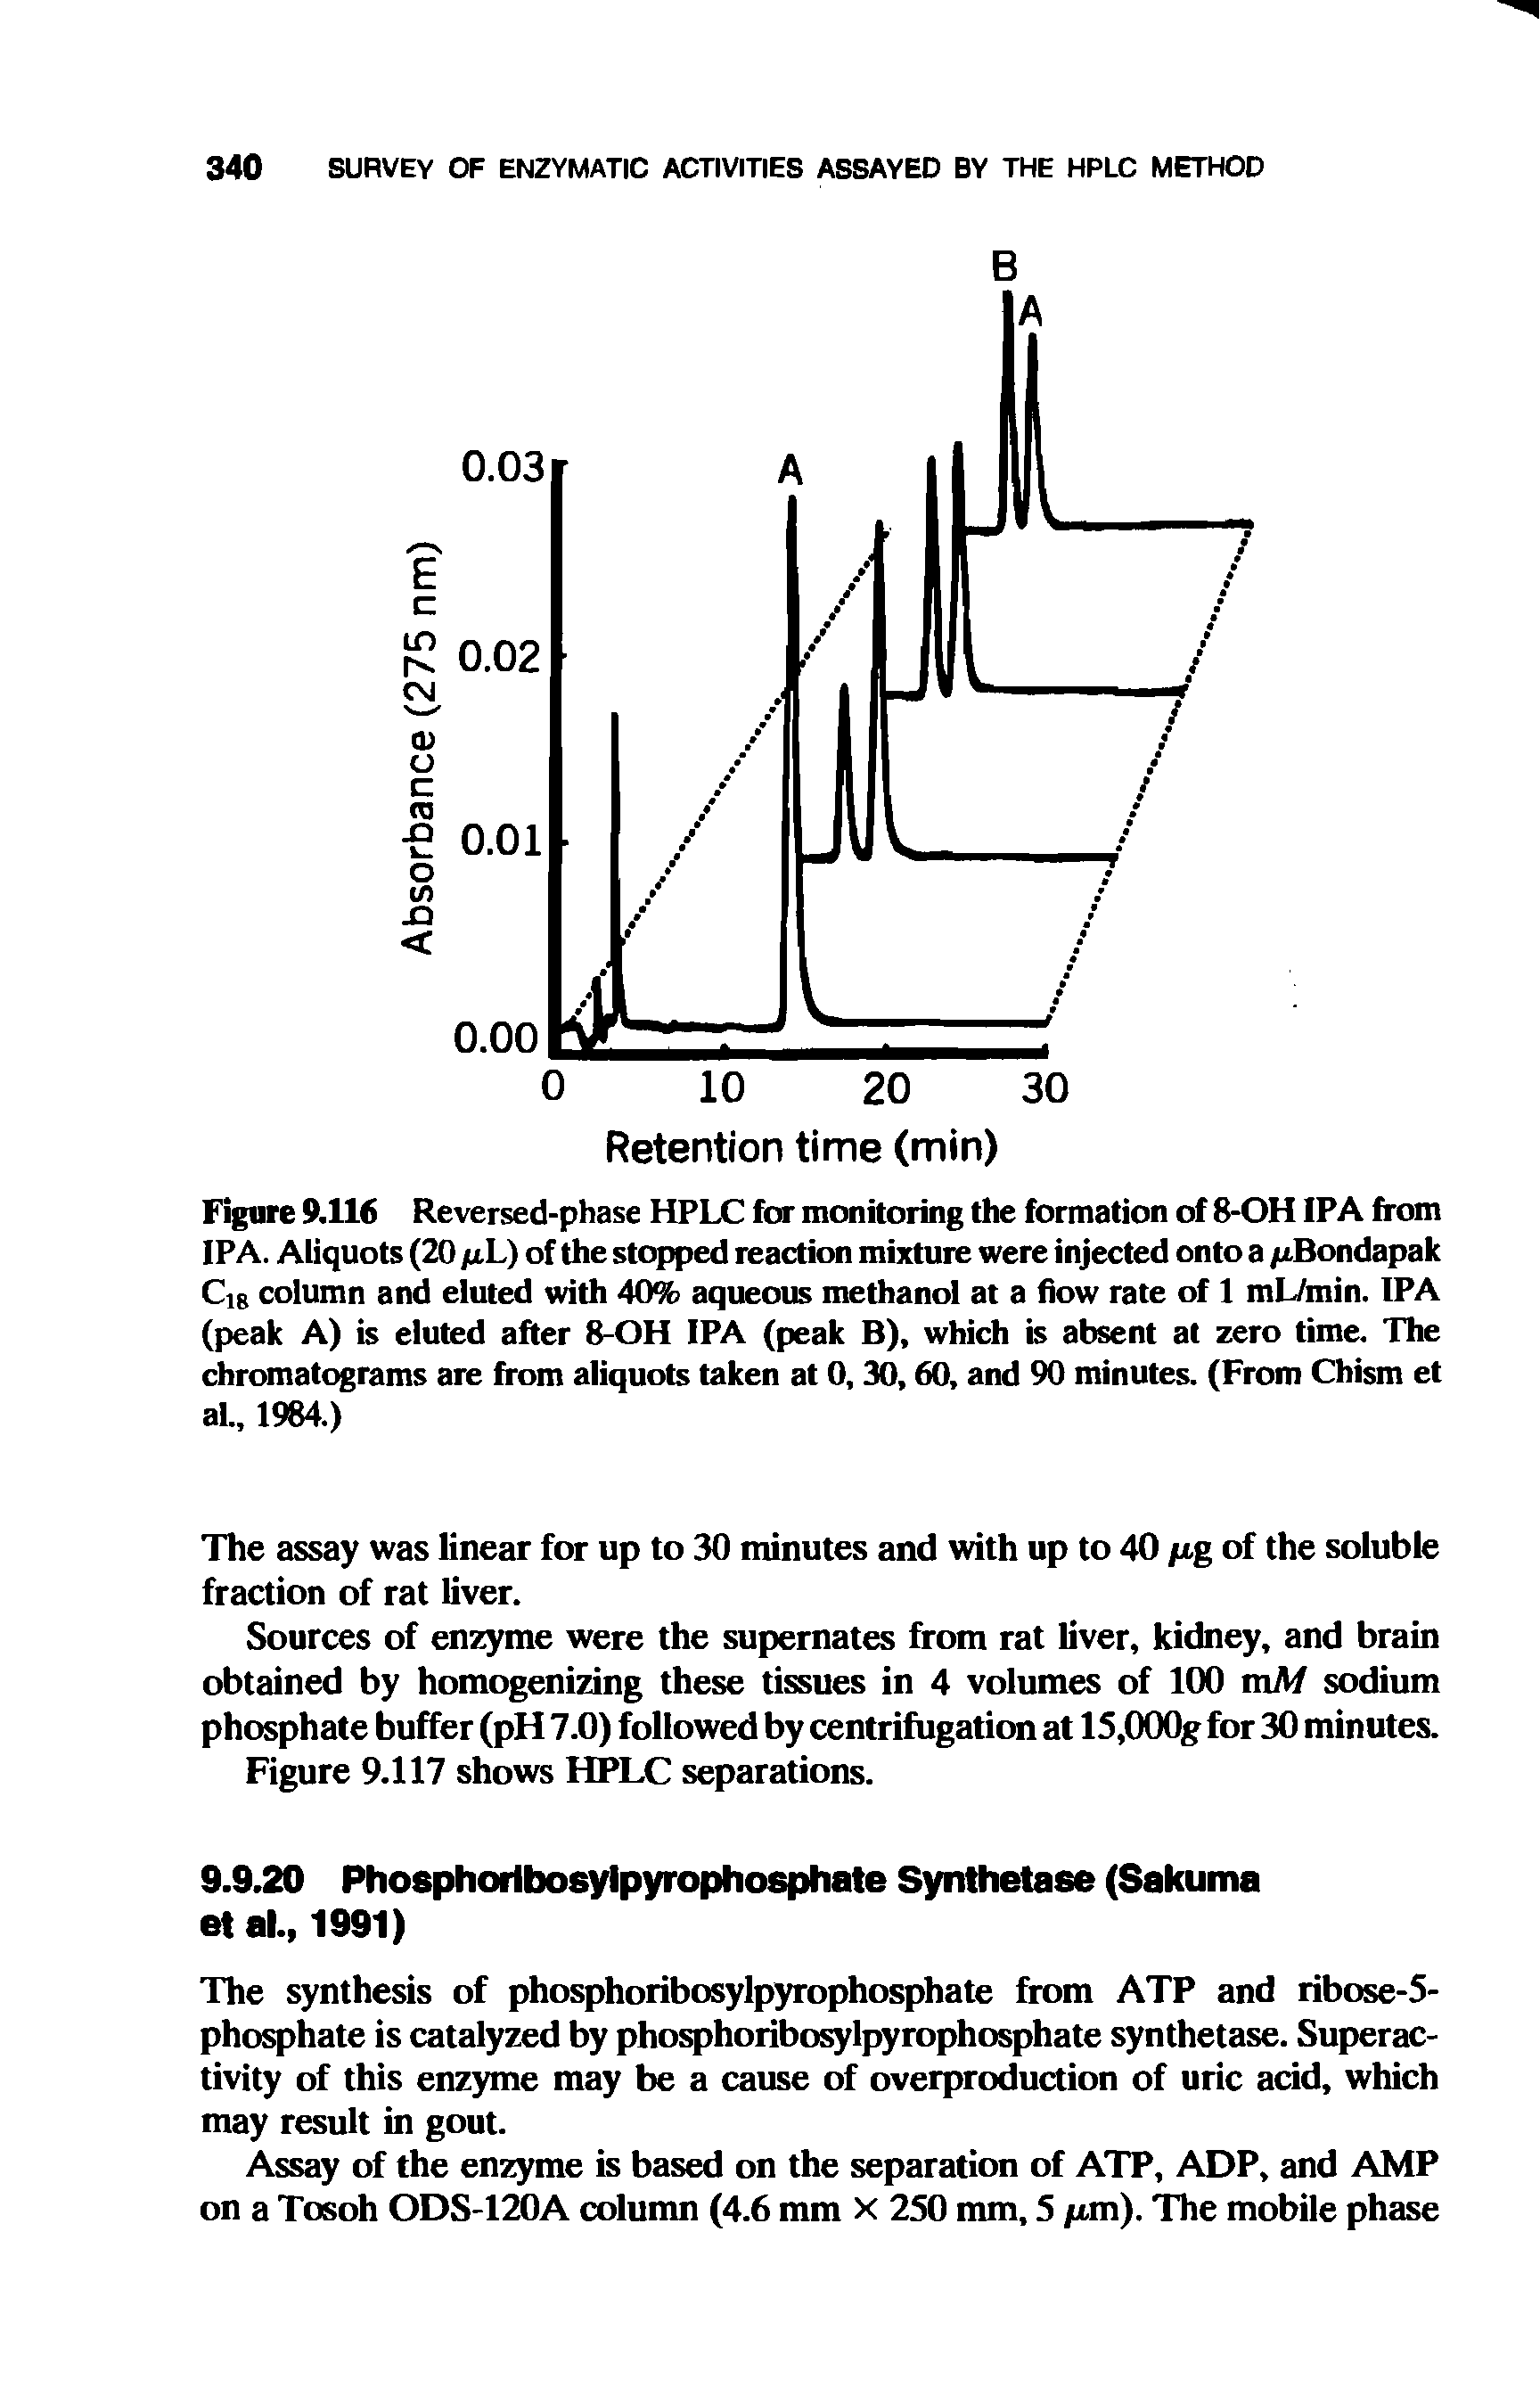 Figure 9.116 Reversed-phase HPLC for monitoring the formation of 8-OHIPA from IPA. Aliquots (20 /xL) of the stopped reaction mixture were injected onto a /xBondapak Cig column and eluted with 40% aqueous methanol at a flow rate of 1 mL/min. IPA (peak A) is eluted after 8-OH IPA (peak B), which is absent at zero time. The chromatograms are from aliquots taken at 0,30,60, and 90 minutes. (From Chism et al 1984.)...